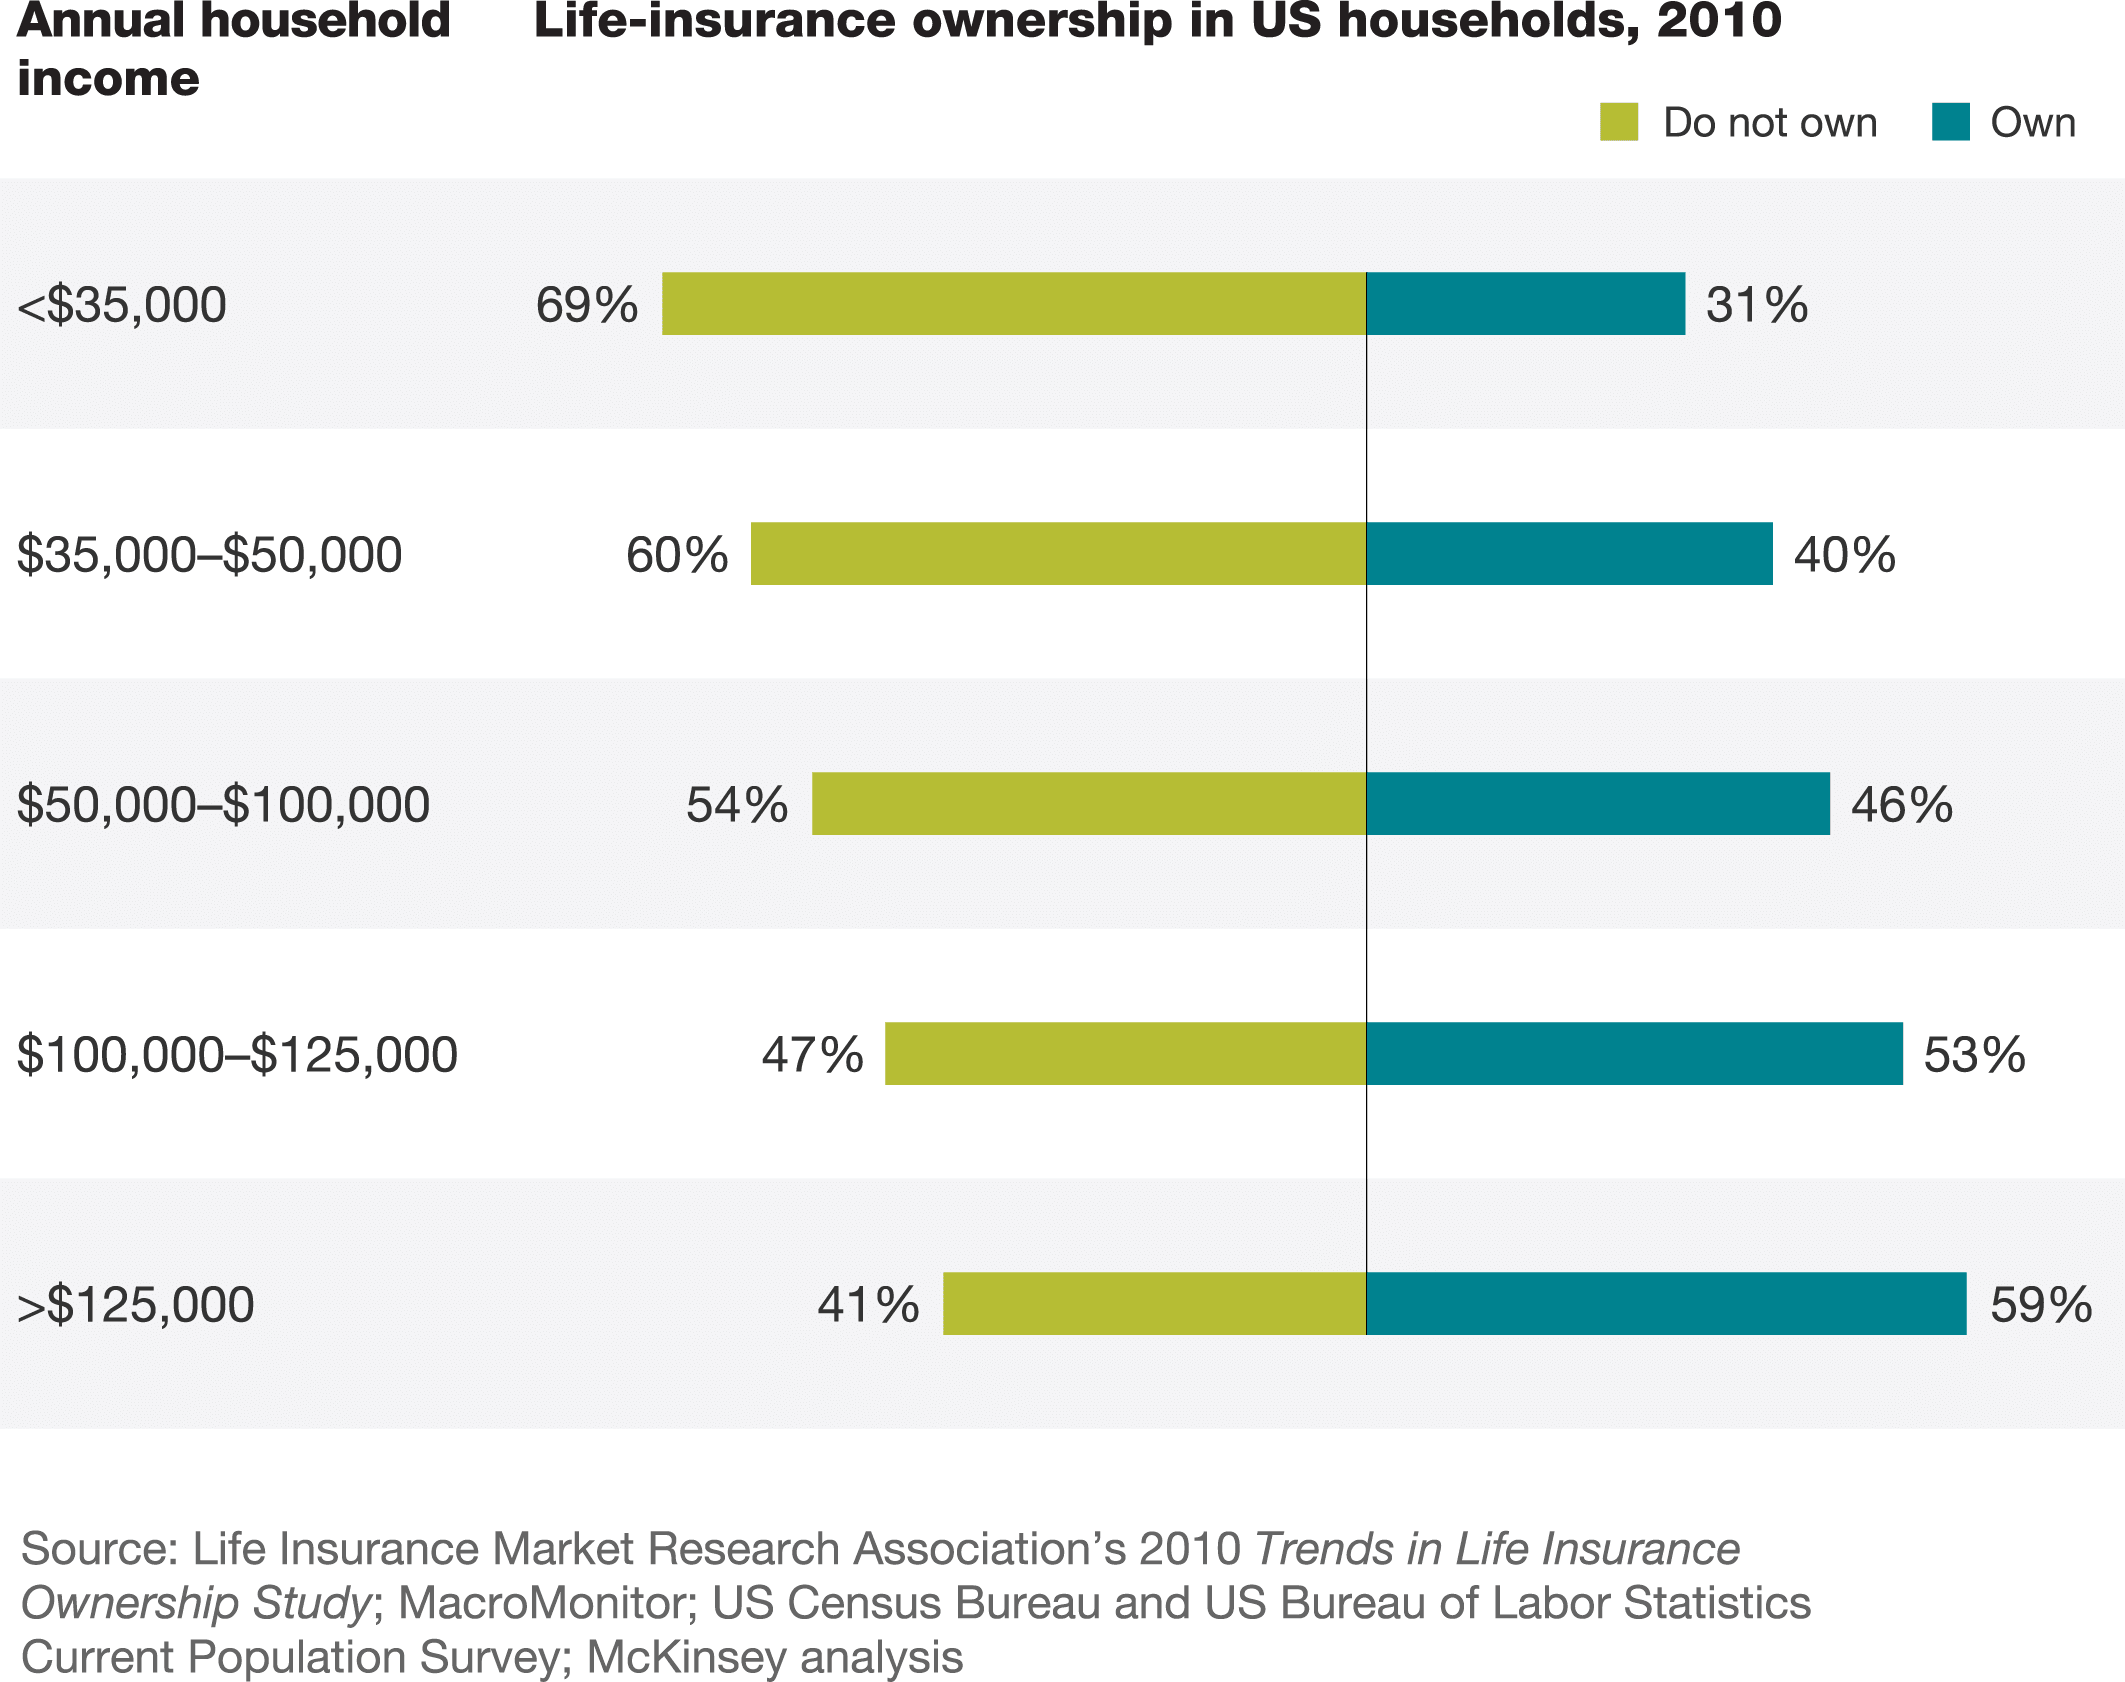 Less than half of US middle market households have life insurance